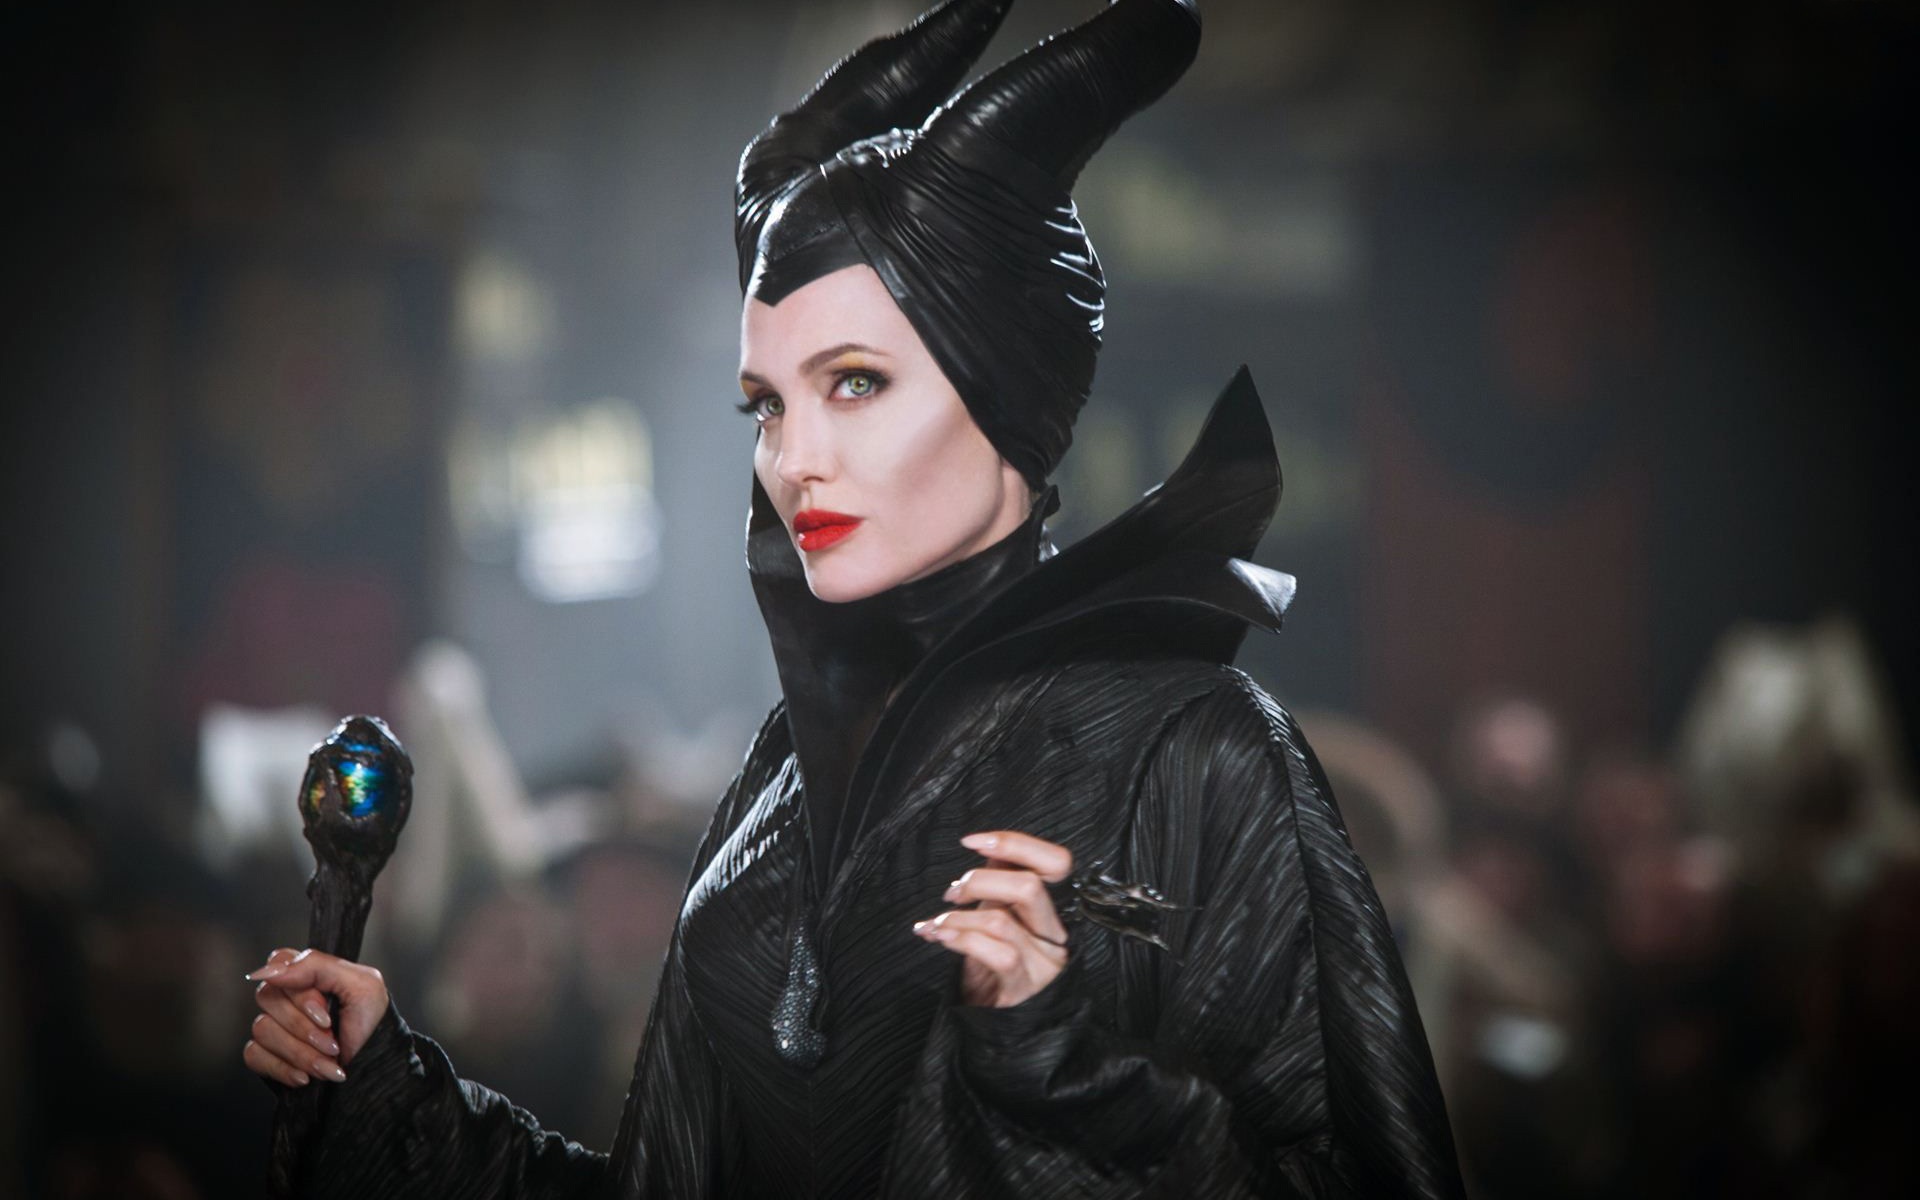 Maleficent 2014 HD movie wallpapers #9 - 1920x1200